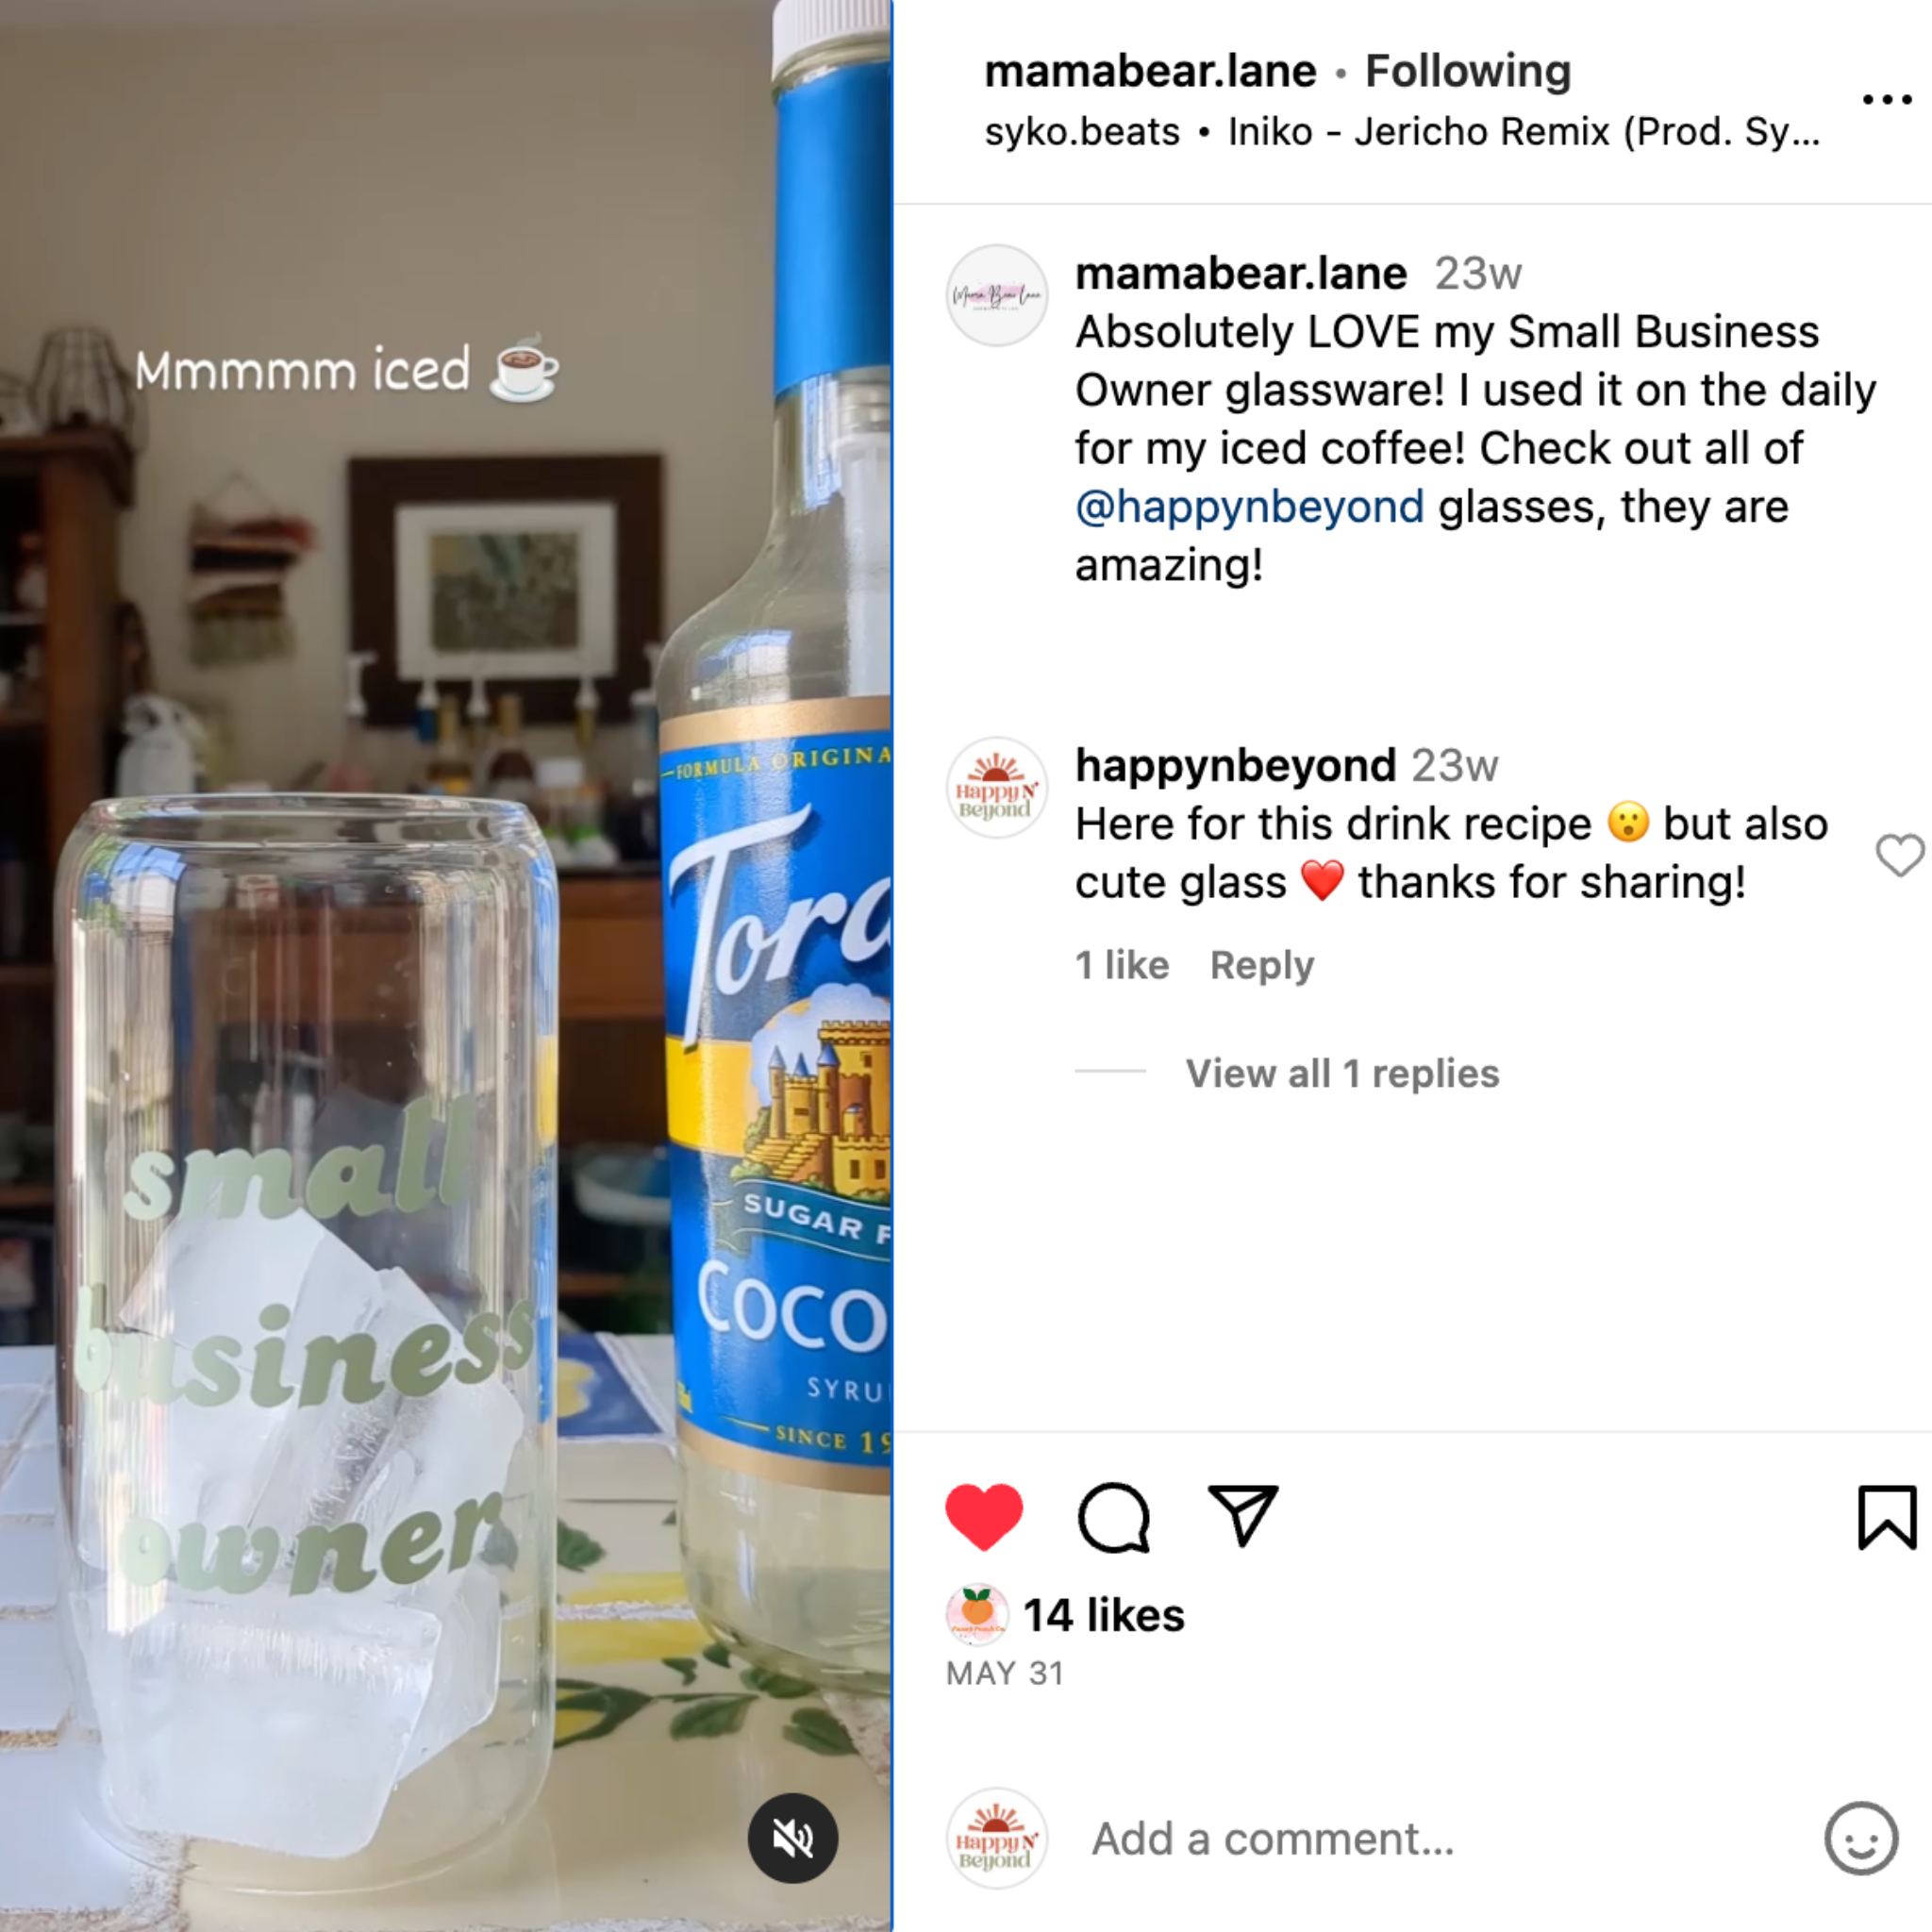 Instagram reel screenshot from mamabear.lane saying "Absolutely LOVE my Small Business Owner glassware! I used it on the daily for my iced coffee! Check out all of @happynbeyond glasses, they are amazing!"